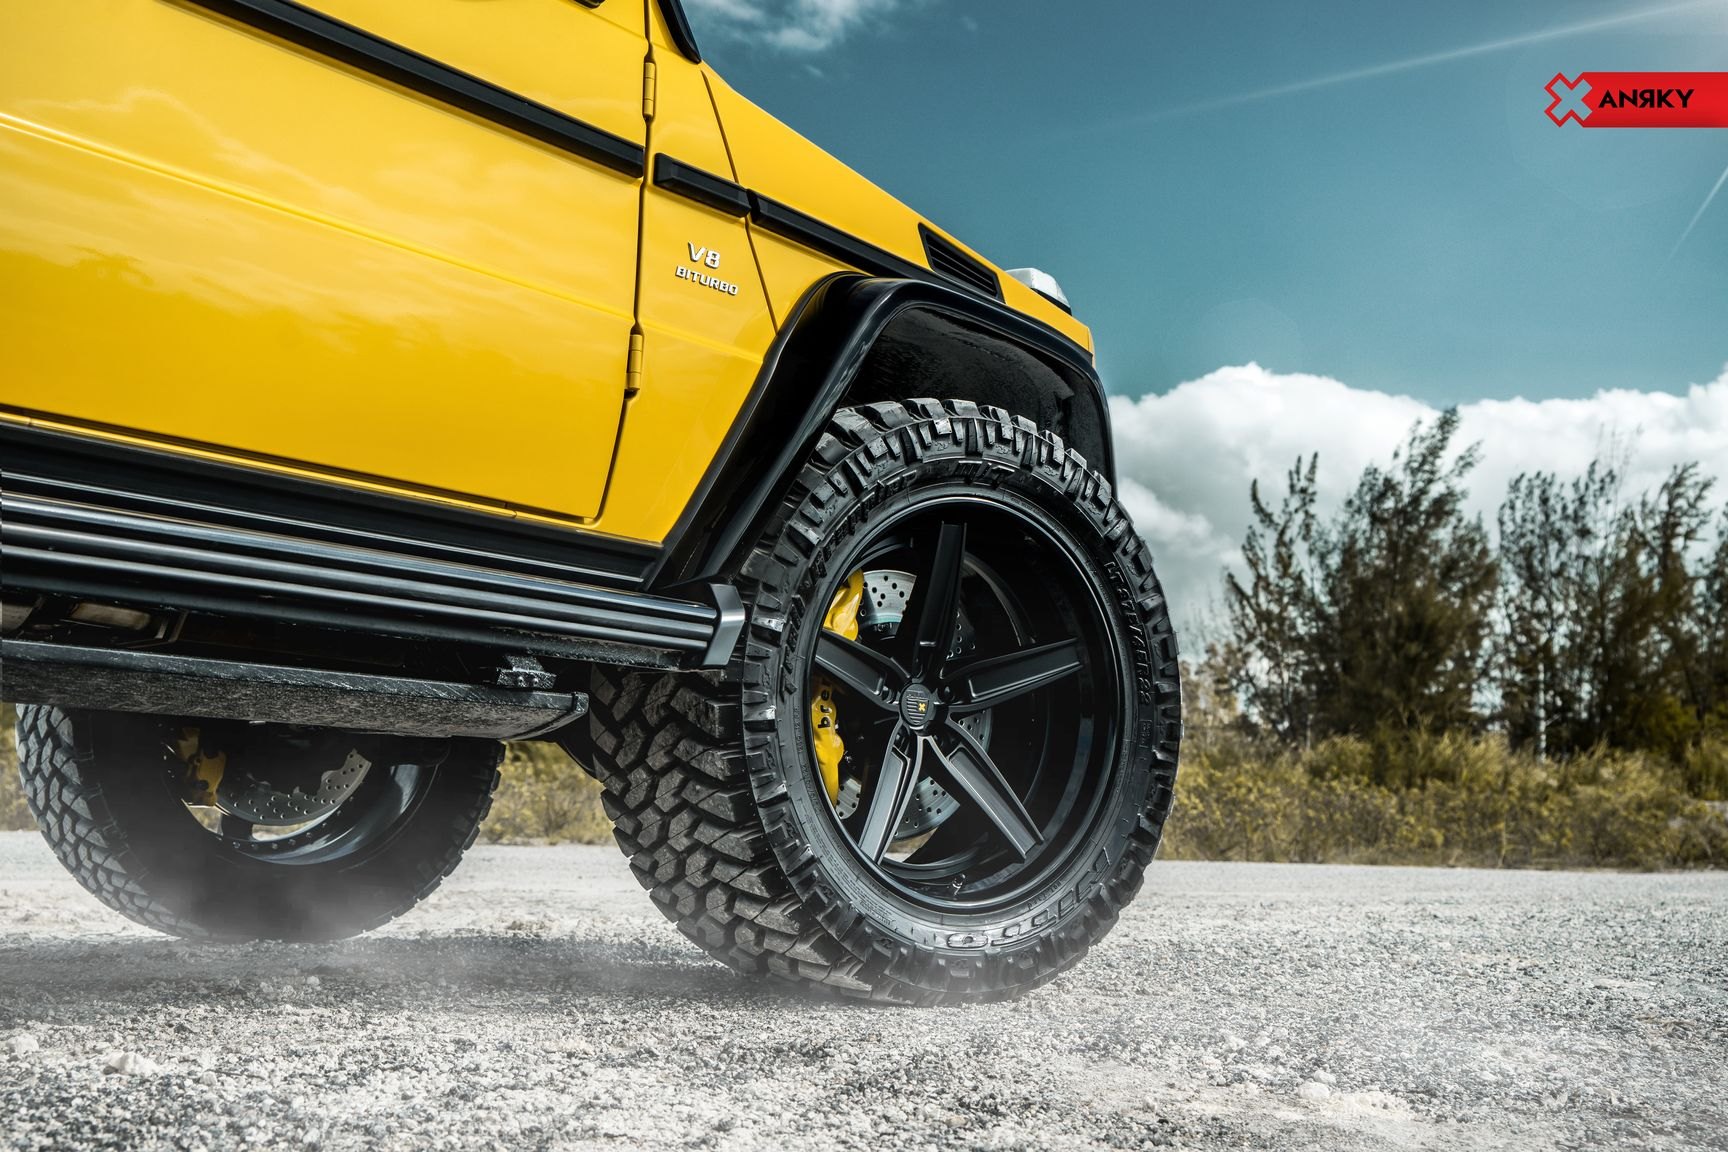 Satin Black Anrky Wheels on Yellow Mercedes G Class - Photo by Anrky Wheels